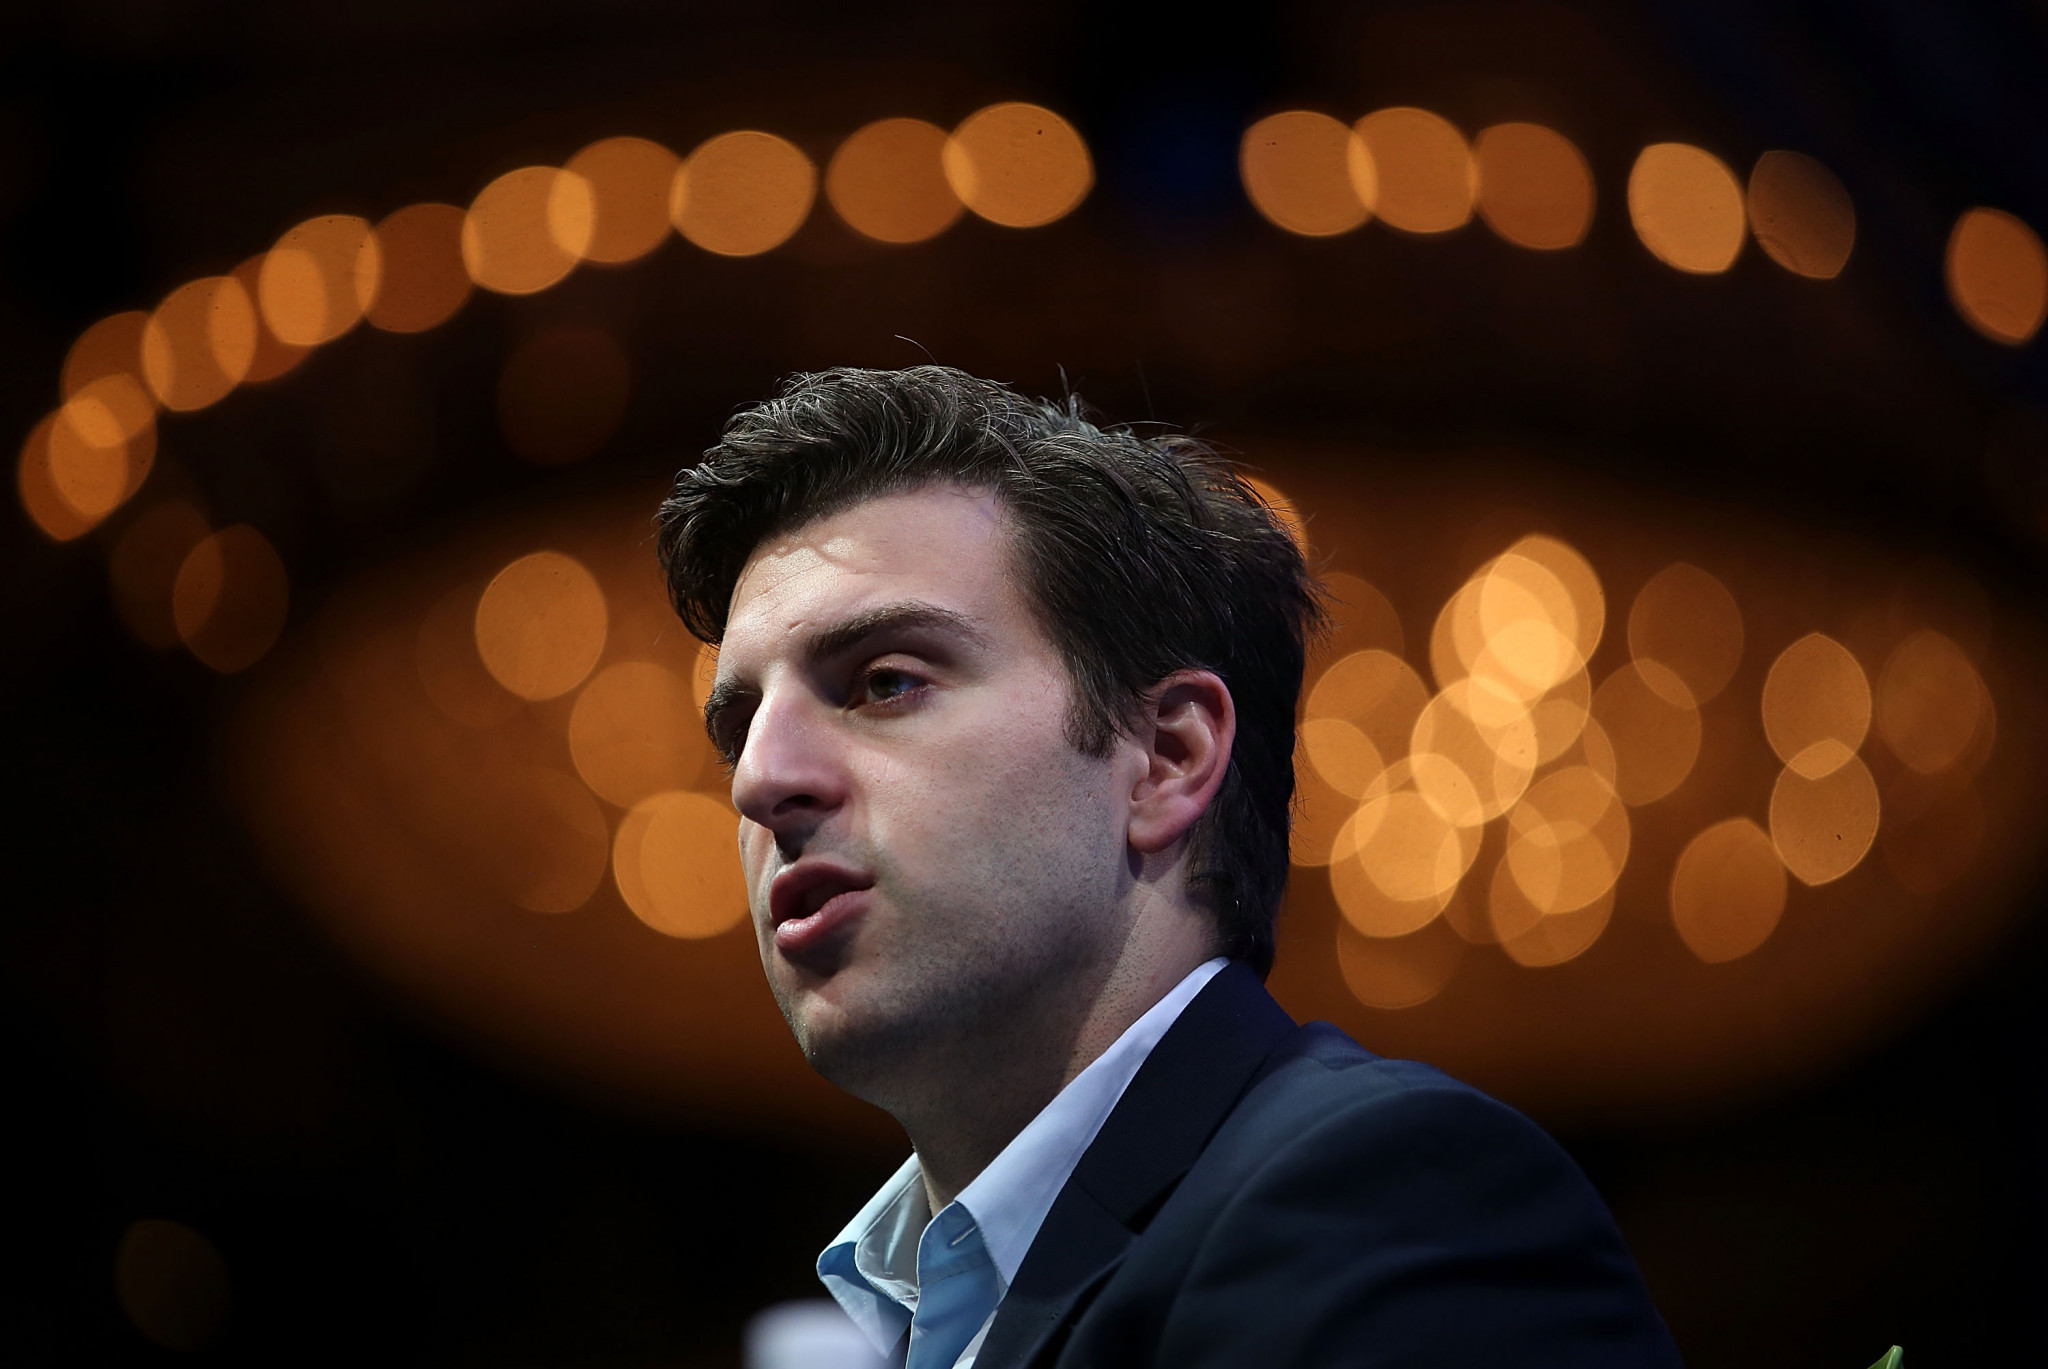 Brian Chesky, chief executive of TOP sponsor Airbnb, has been invited to meet virtually with campaigners highlighting the plight of Uighur Muslims in China ©Getty Images